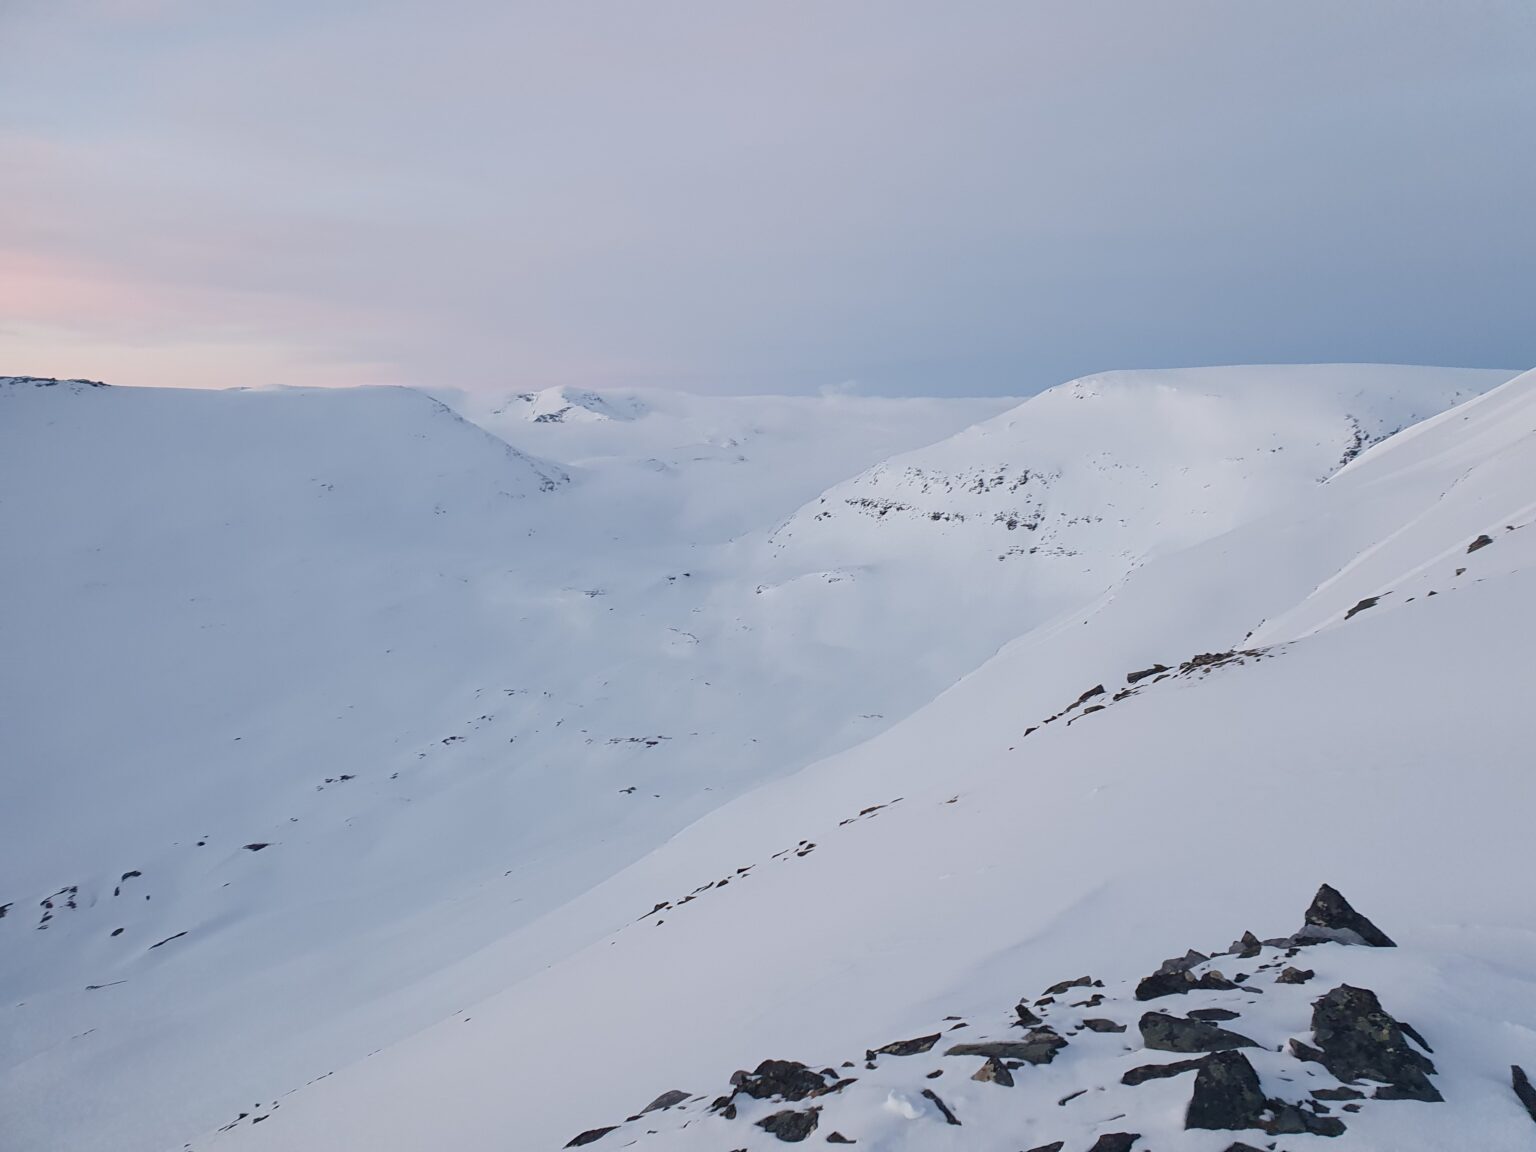 A closer look at the Southeast col of Brattlifjellet